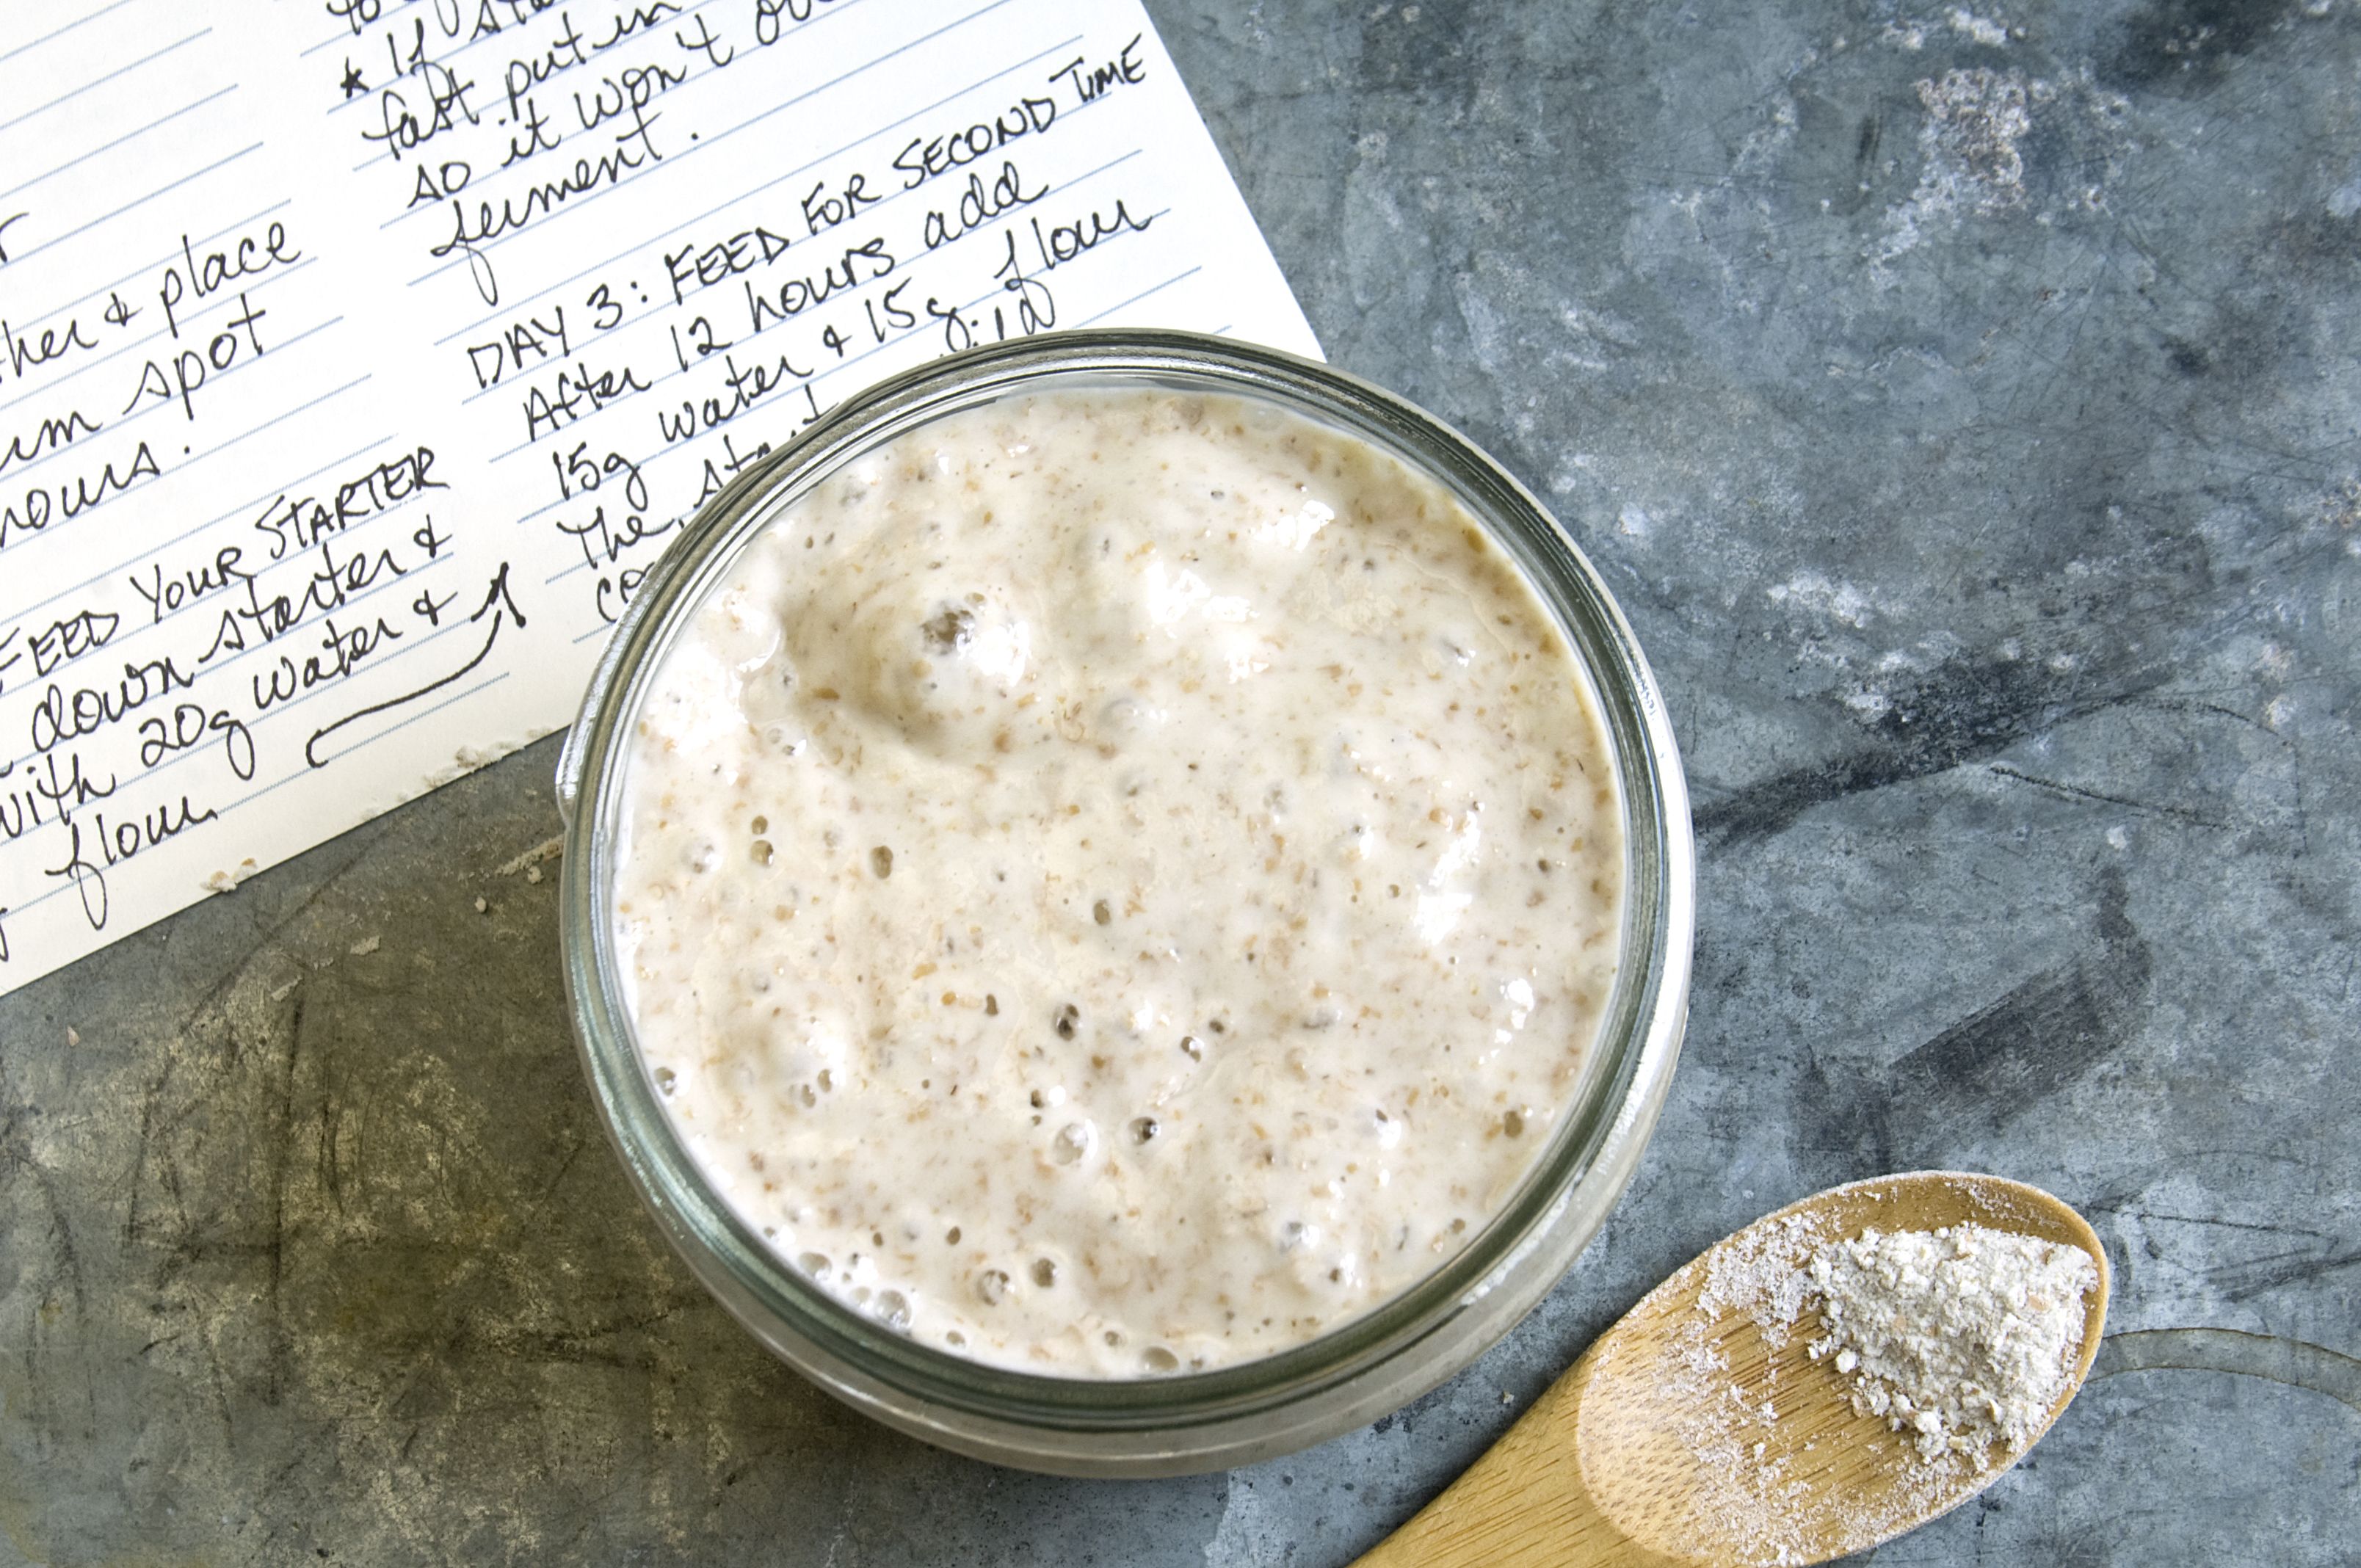 How to Make a Sourdough Starter - How to Make Sourdough Bread From